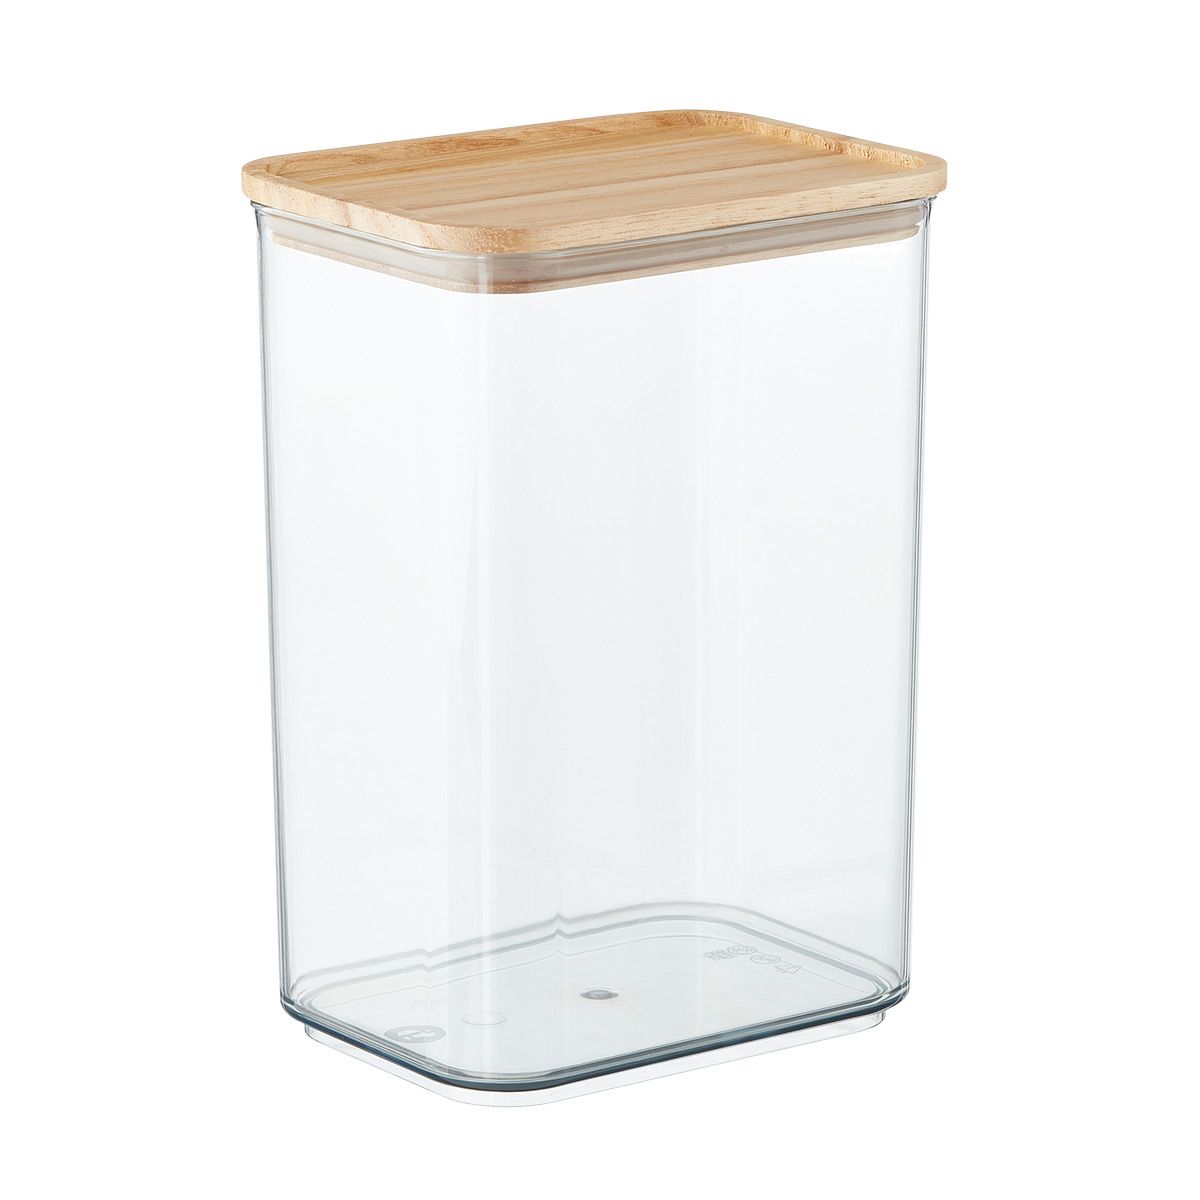 Rosanna Pansino x iD 13 .3 c . Canister w/ Wood Lid Clear | The Container Store